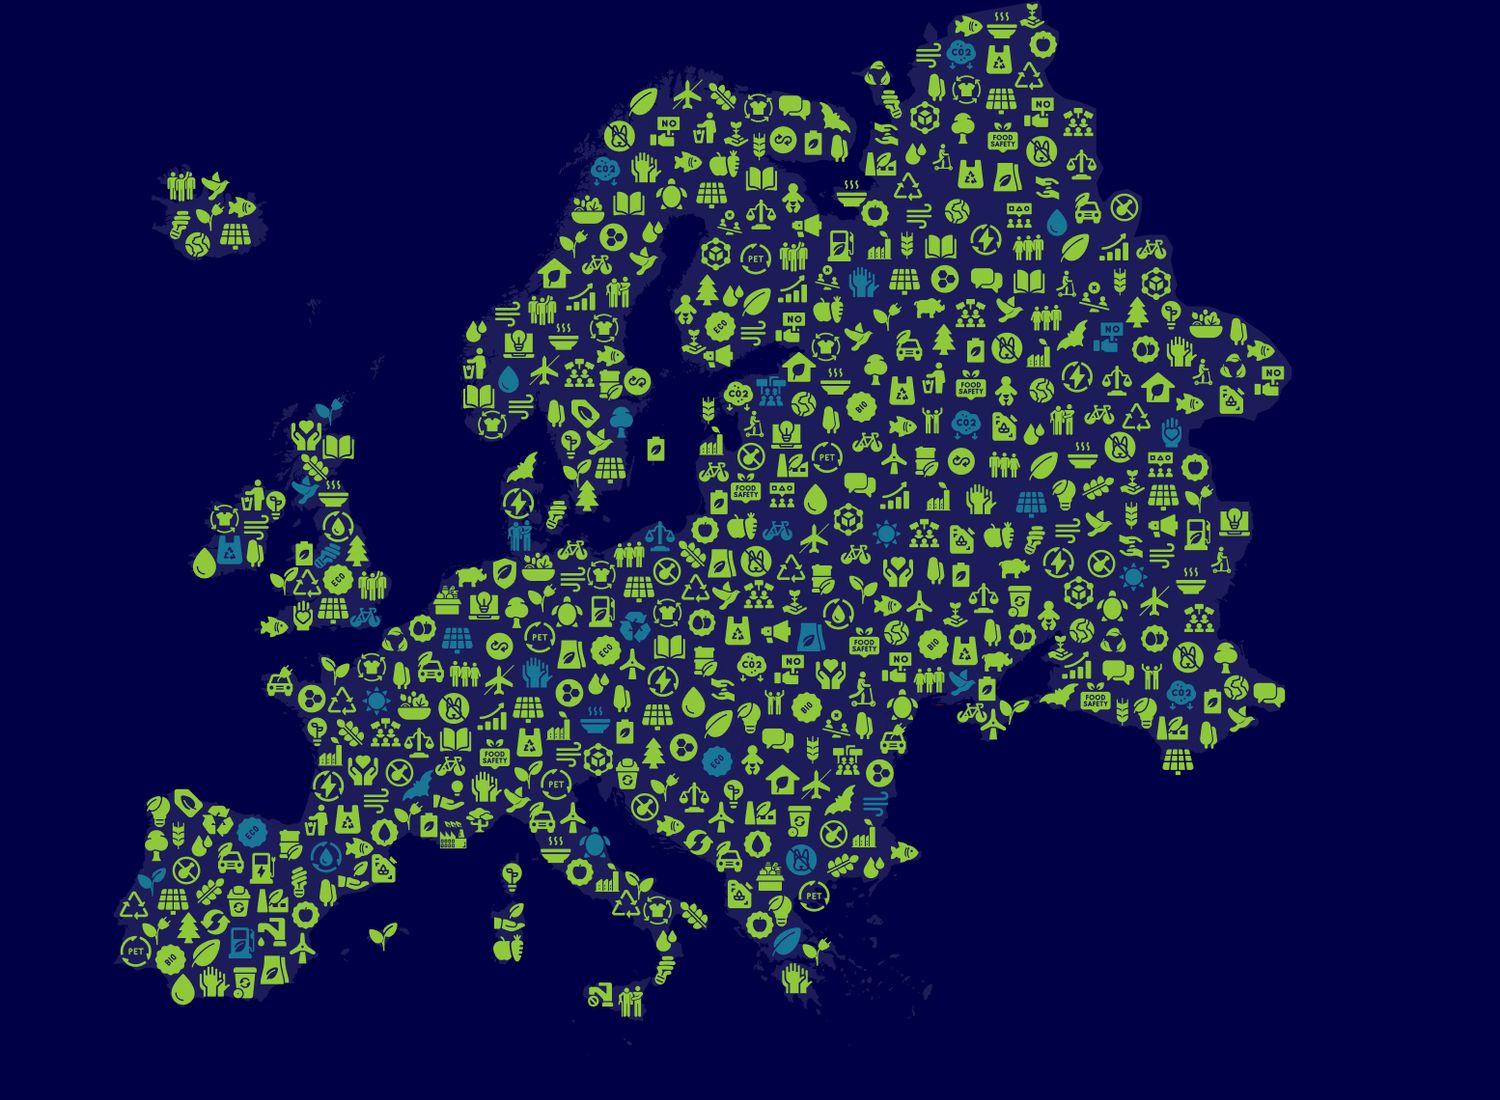 Key visual of the #Green4Europe Incubation Programme: a map of Europe, built out of icons.